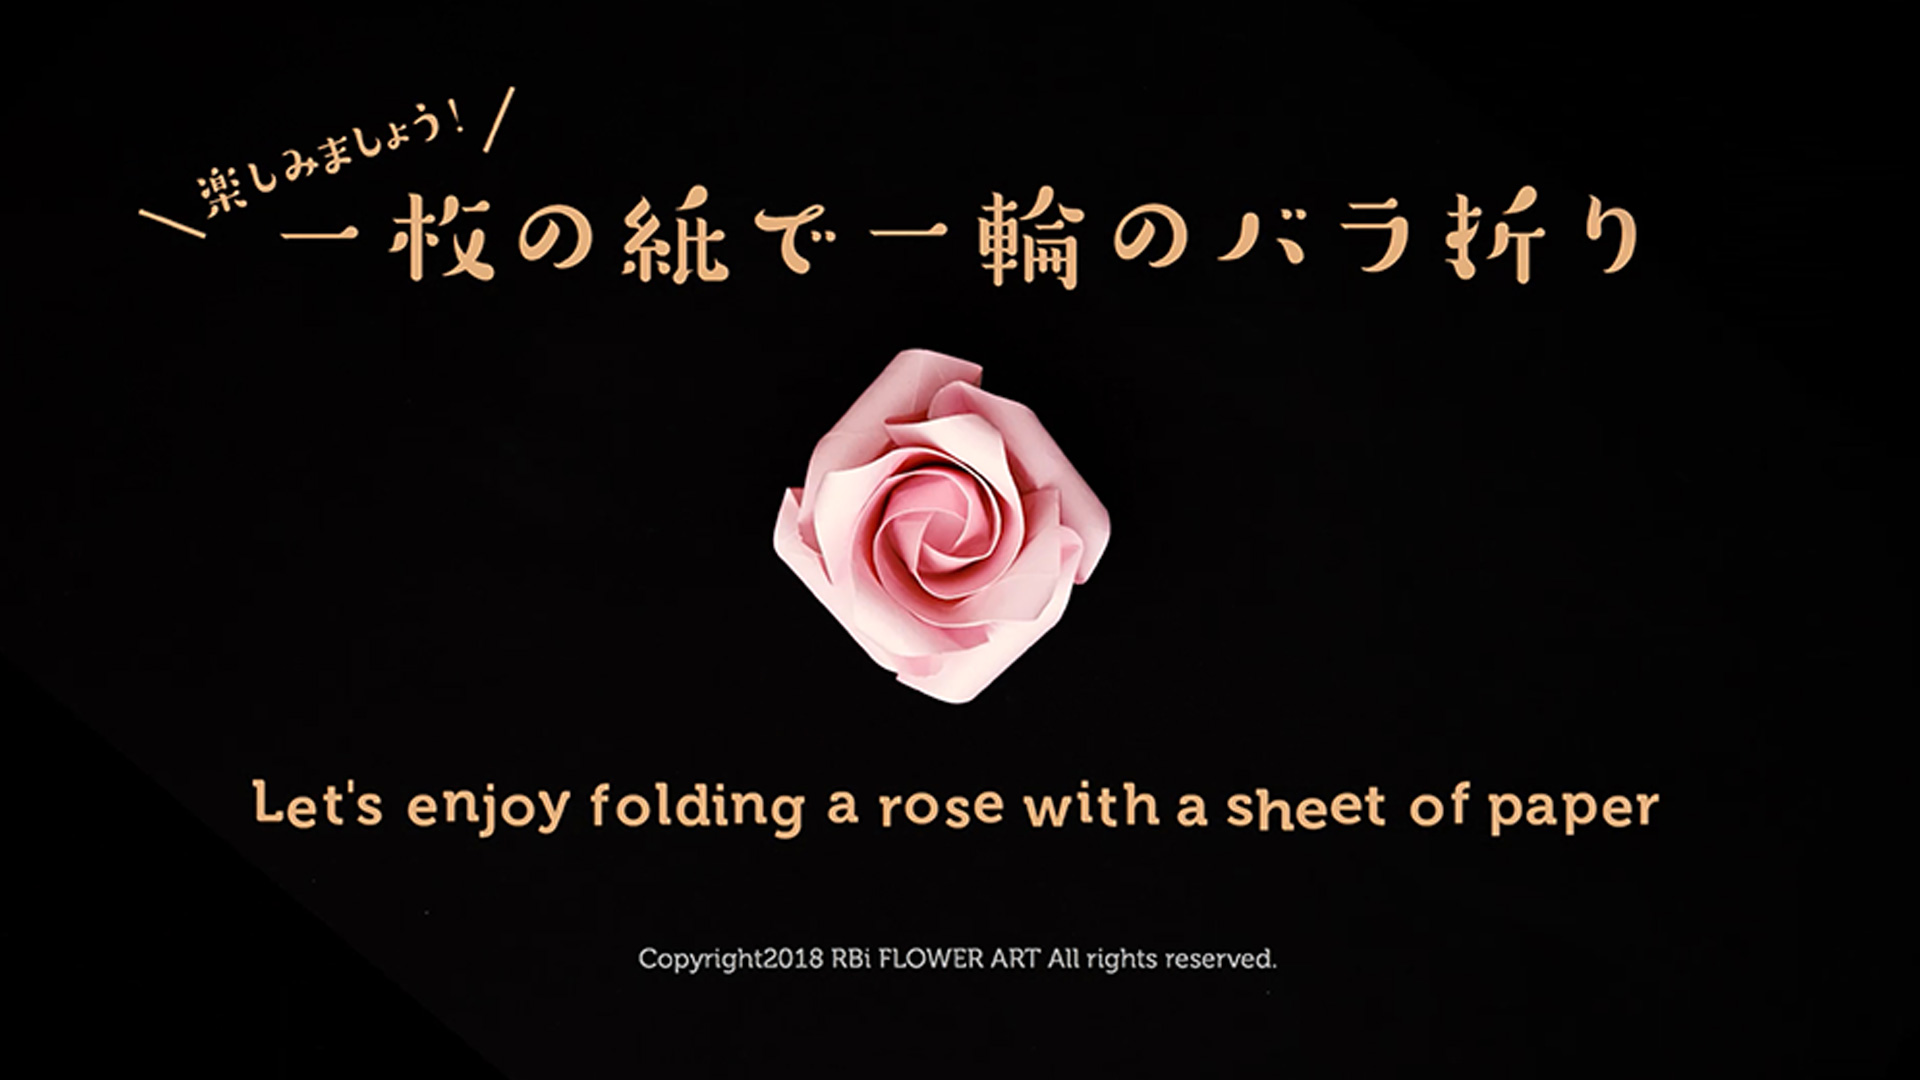 Released on March 30th "Online Rose Folding Video